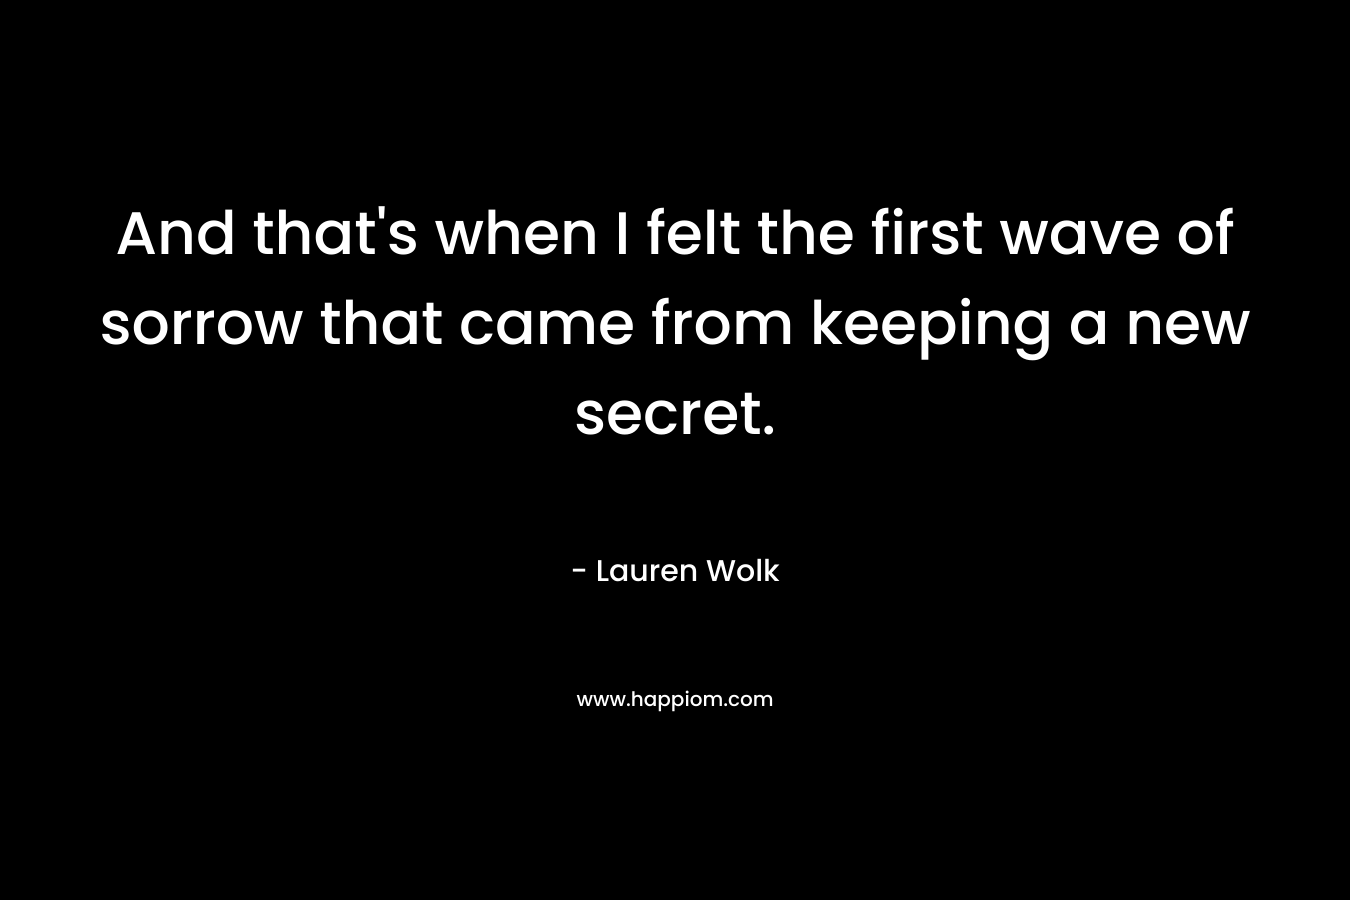 And that’s when I felt the first wave of sorrow that came from keeping a new secret. – Lauren Wolk